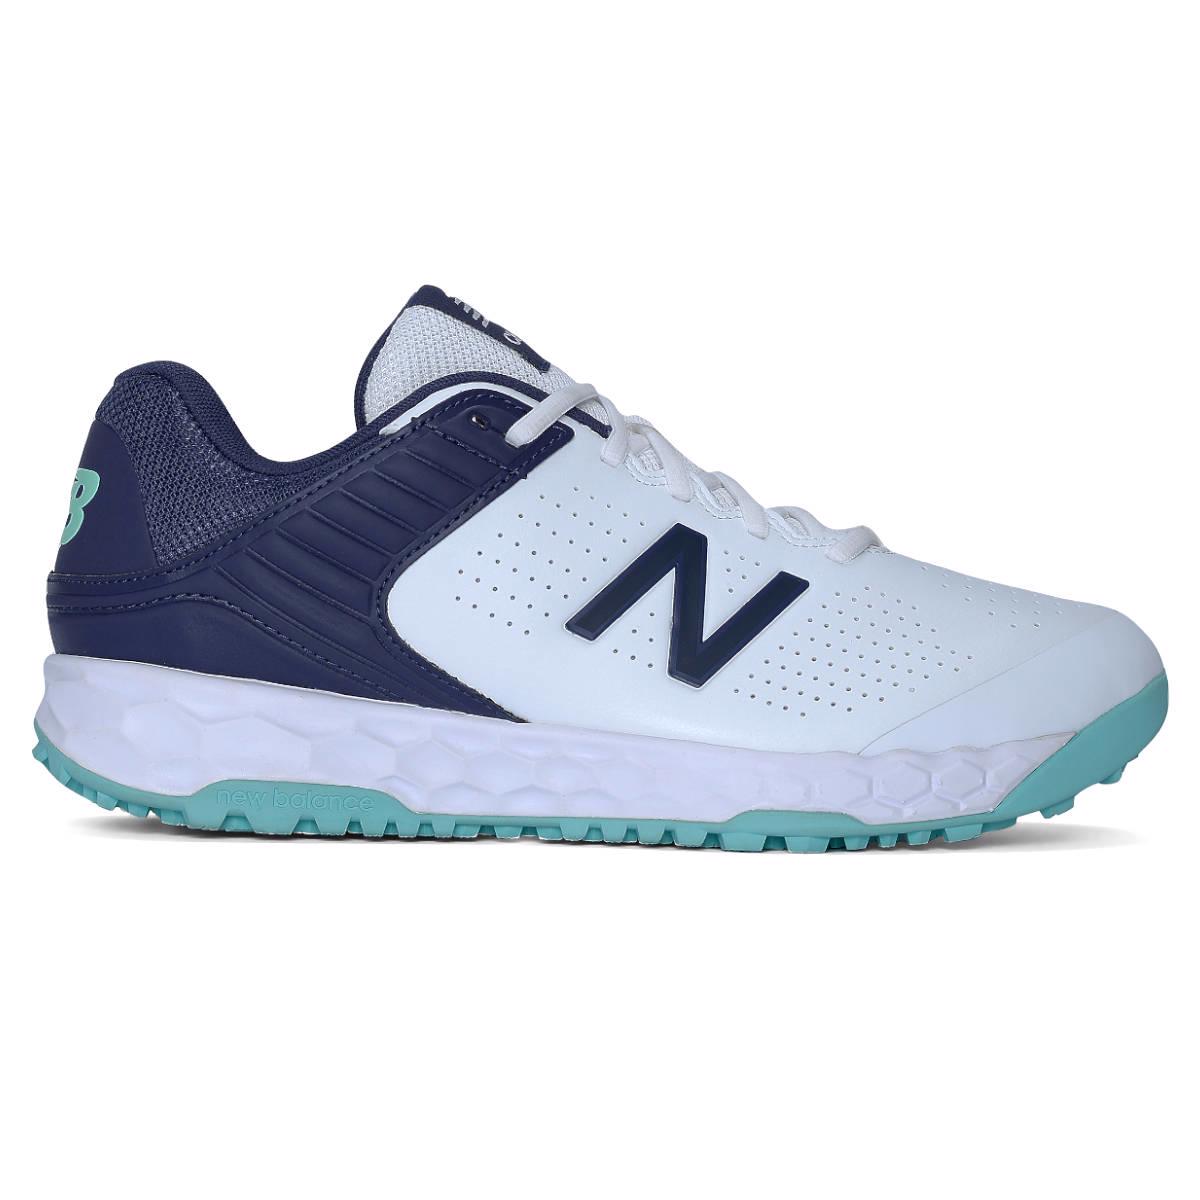 New Balance CK4020 J4 Rubber Cricket Shoes - CLEARANCE CRICKET SHOES